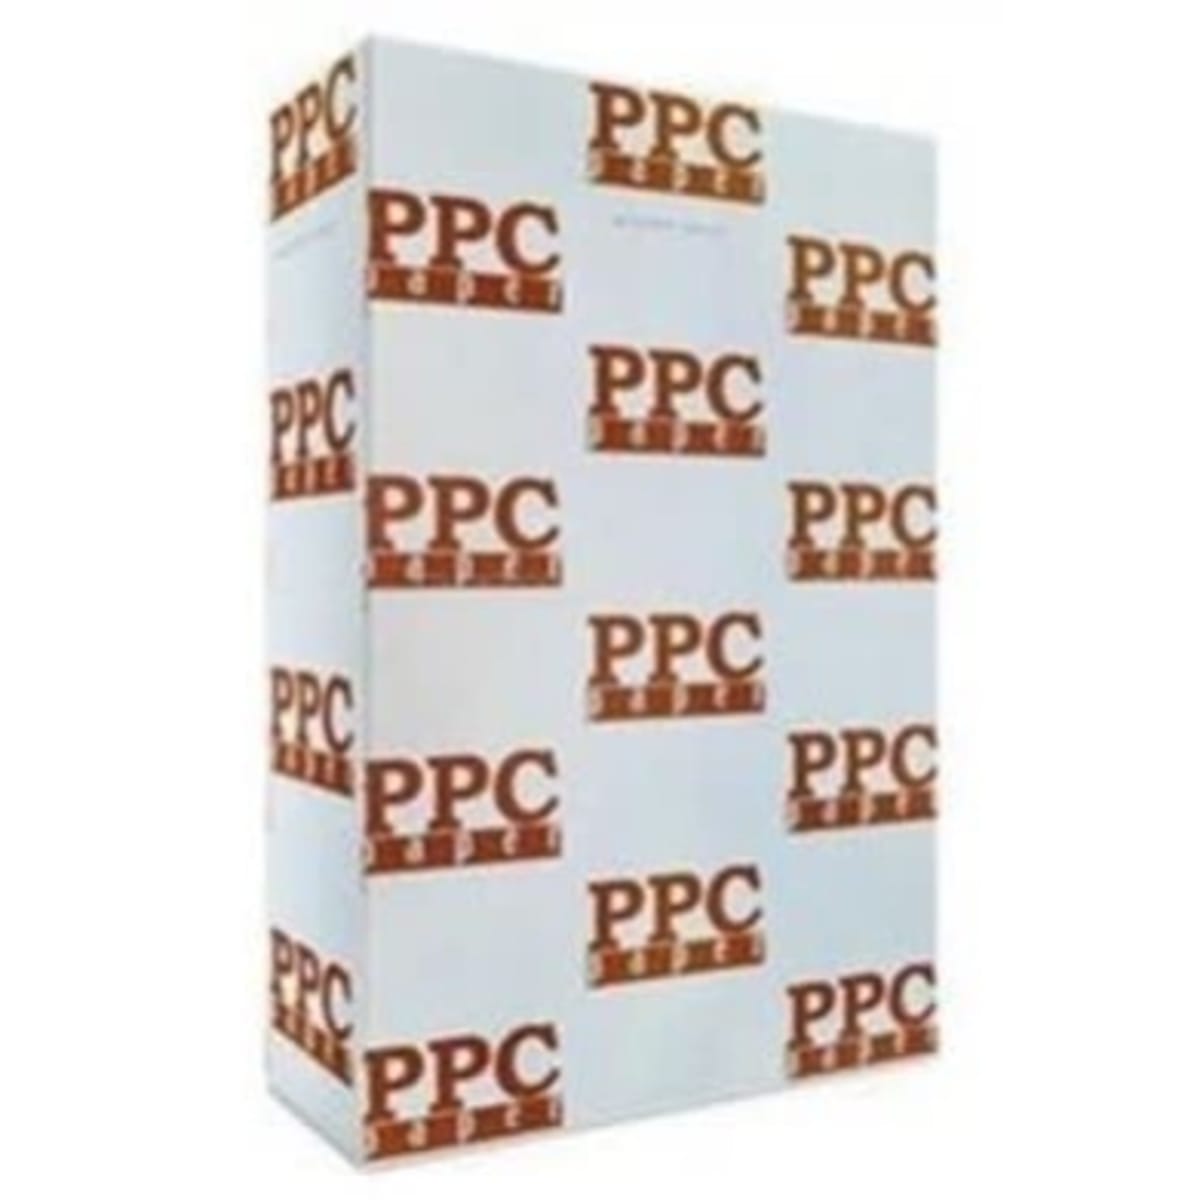 Ppc A4 Printing Paper - White